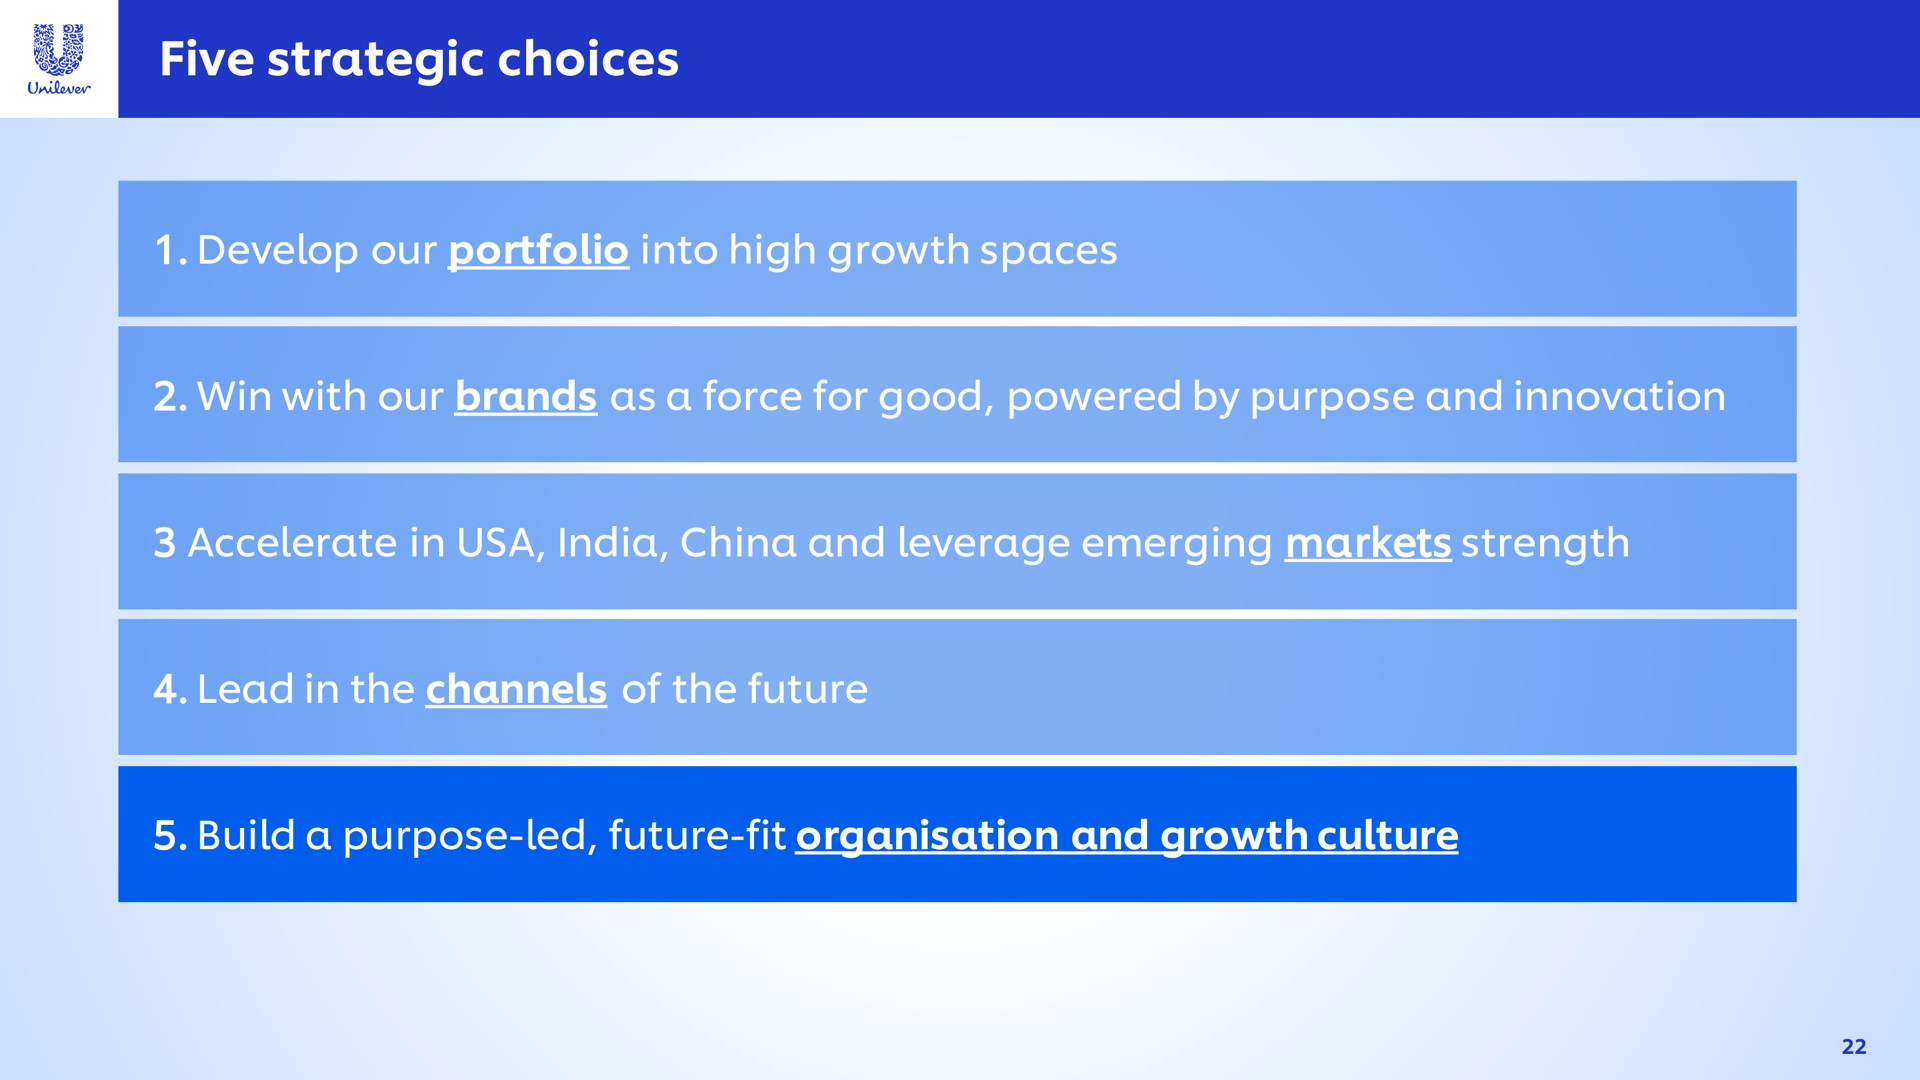 five strategic choices a build a purpose led future fit and growth culture | Unilever